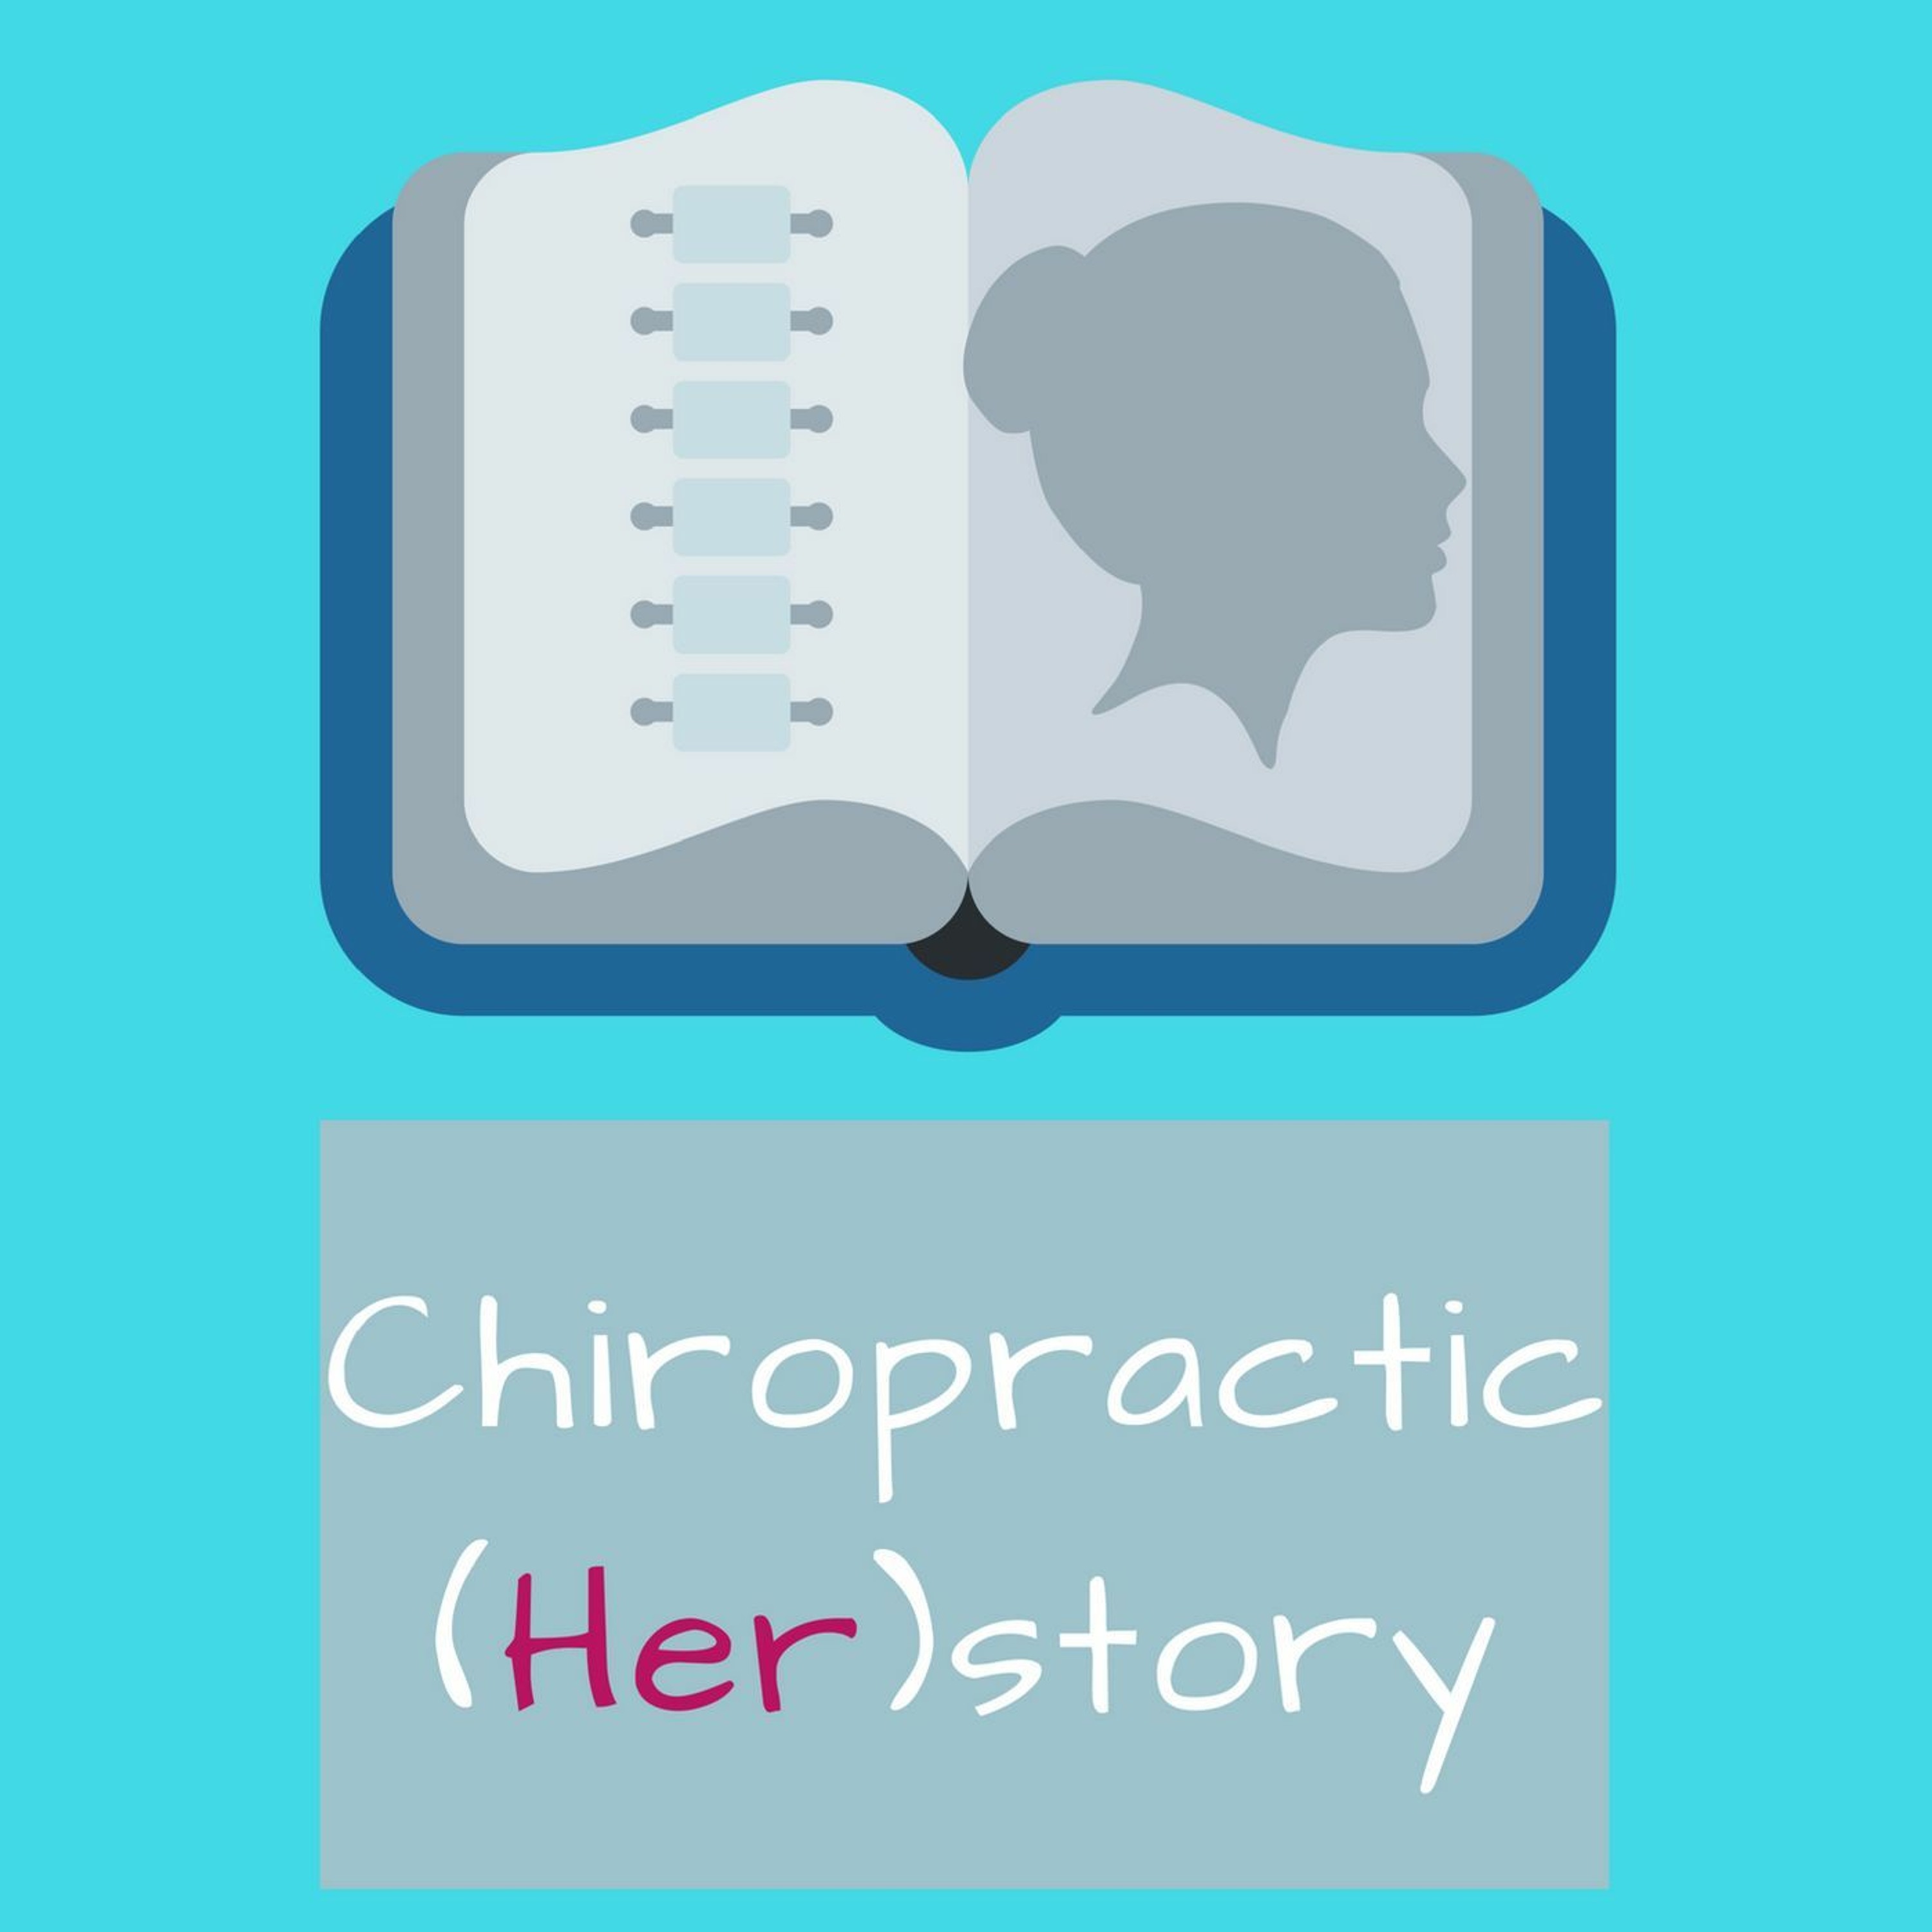 Dr. Sonia McGowin Chiropractic (Her)story Episode 61